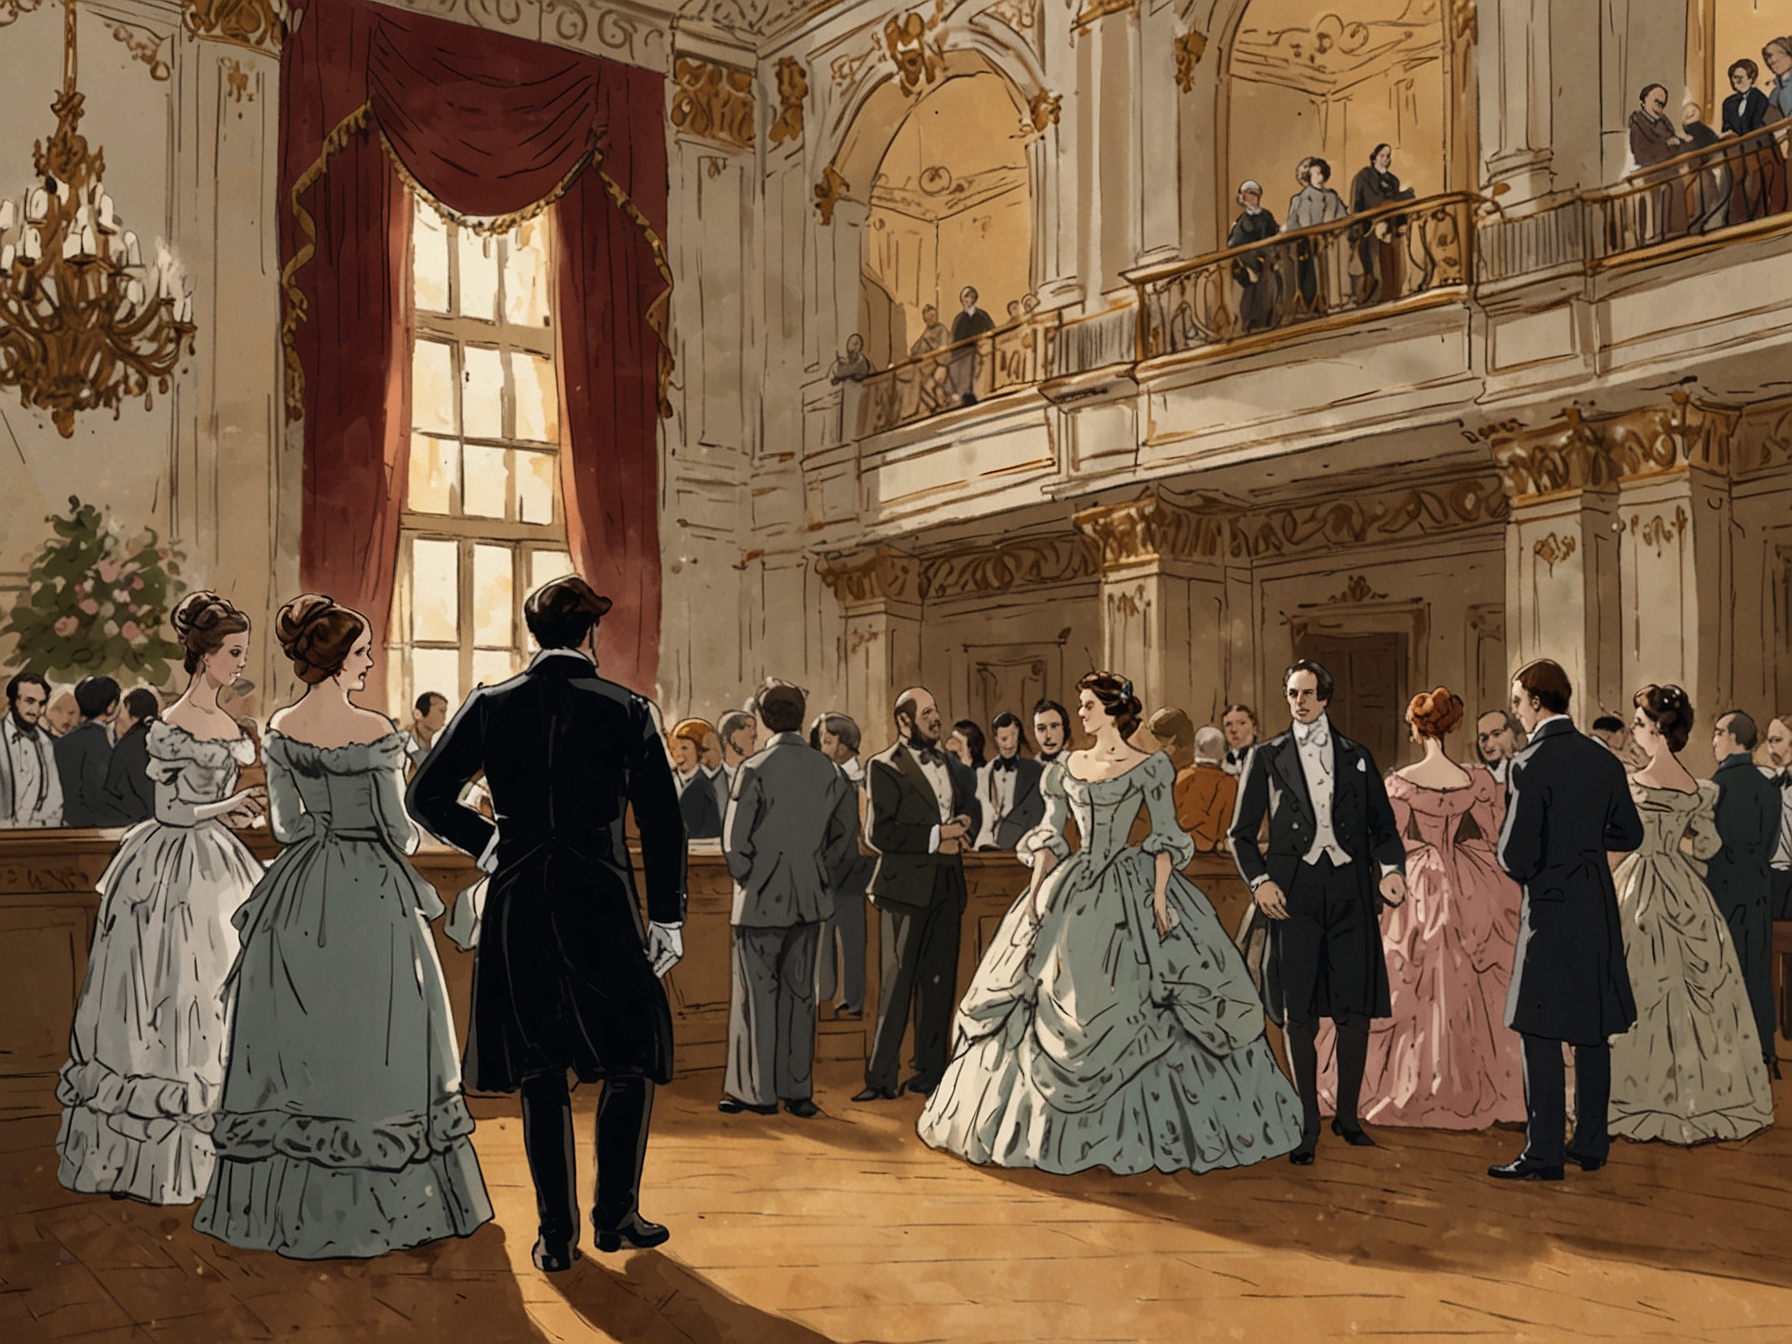 A grand ballroom scene with characters dressed in Regency-era costumes, where an eagle-eyed fan has spotted a character wearing a modern wristwatch, highlighting an anachronistic detail.